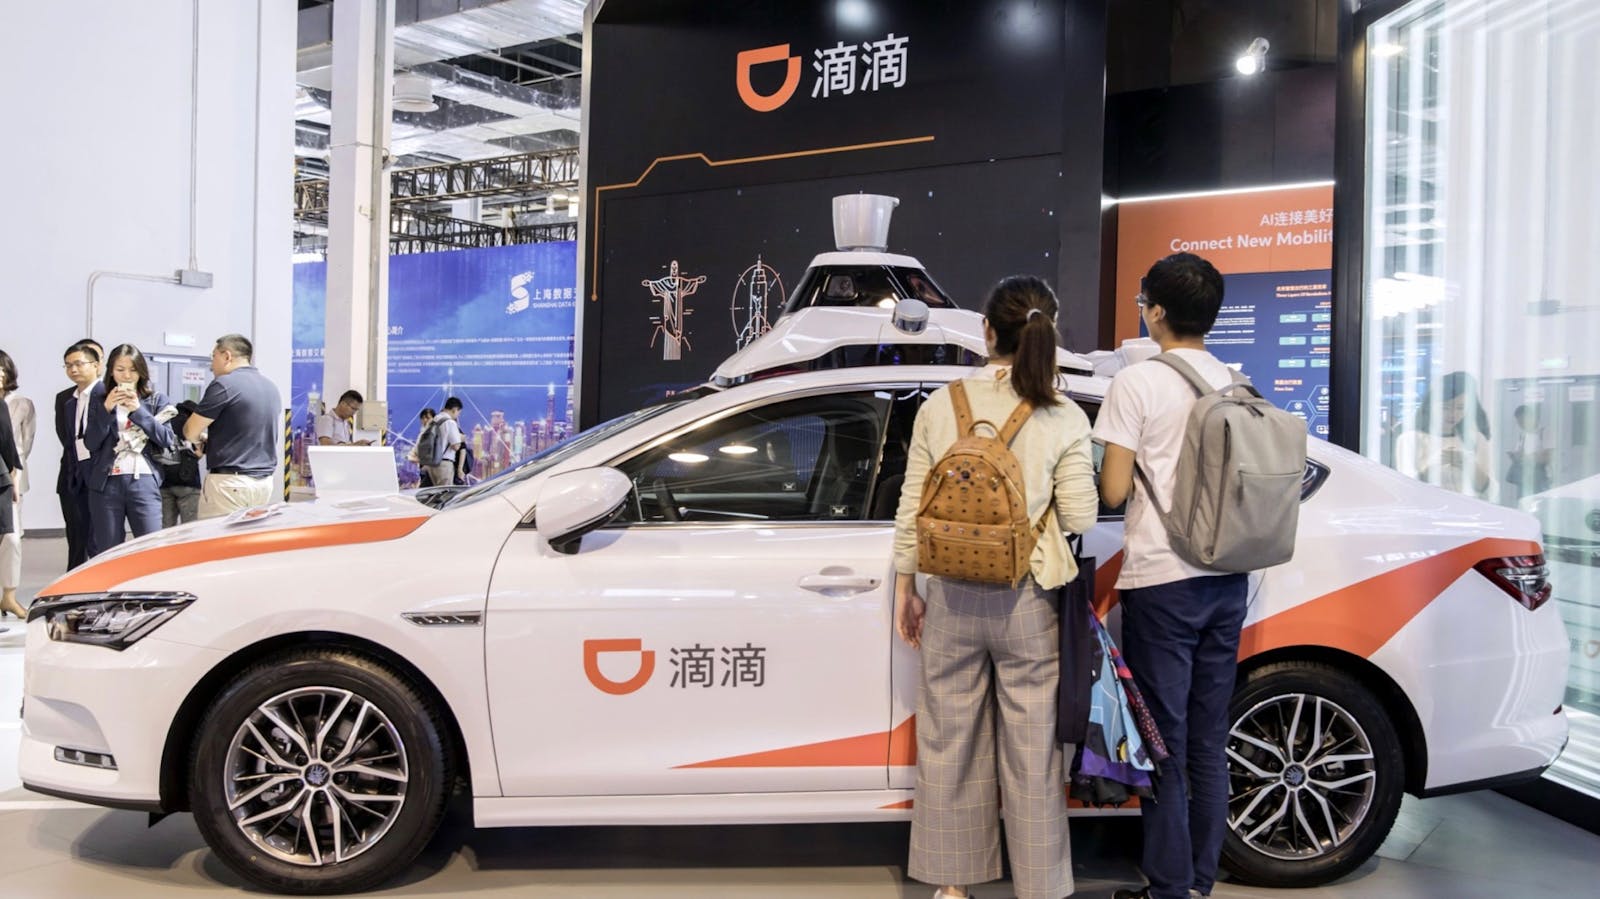 Attendees looked at a Didi autonomous vehicle at the World Artificial Intelligence Conference in Shanghai in August. Photo: Bloomberg